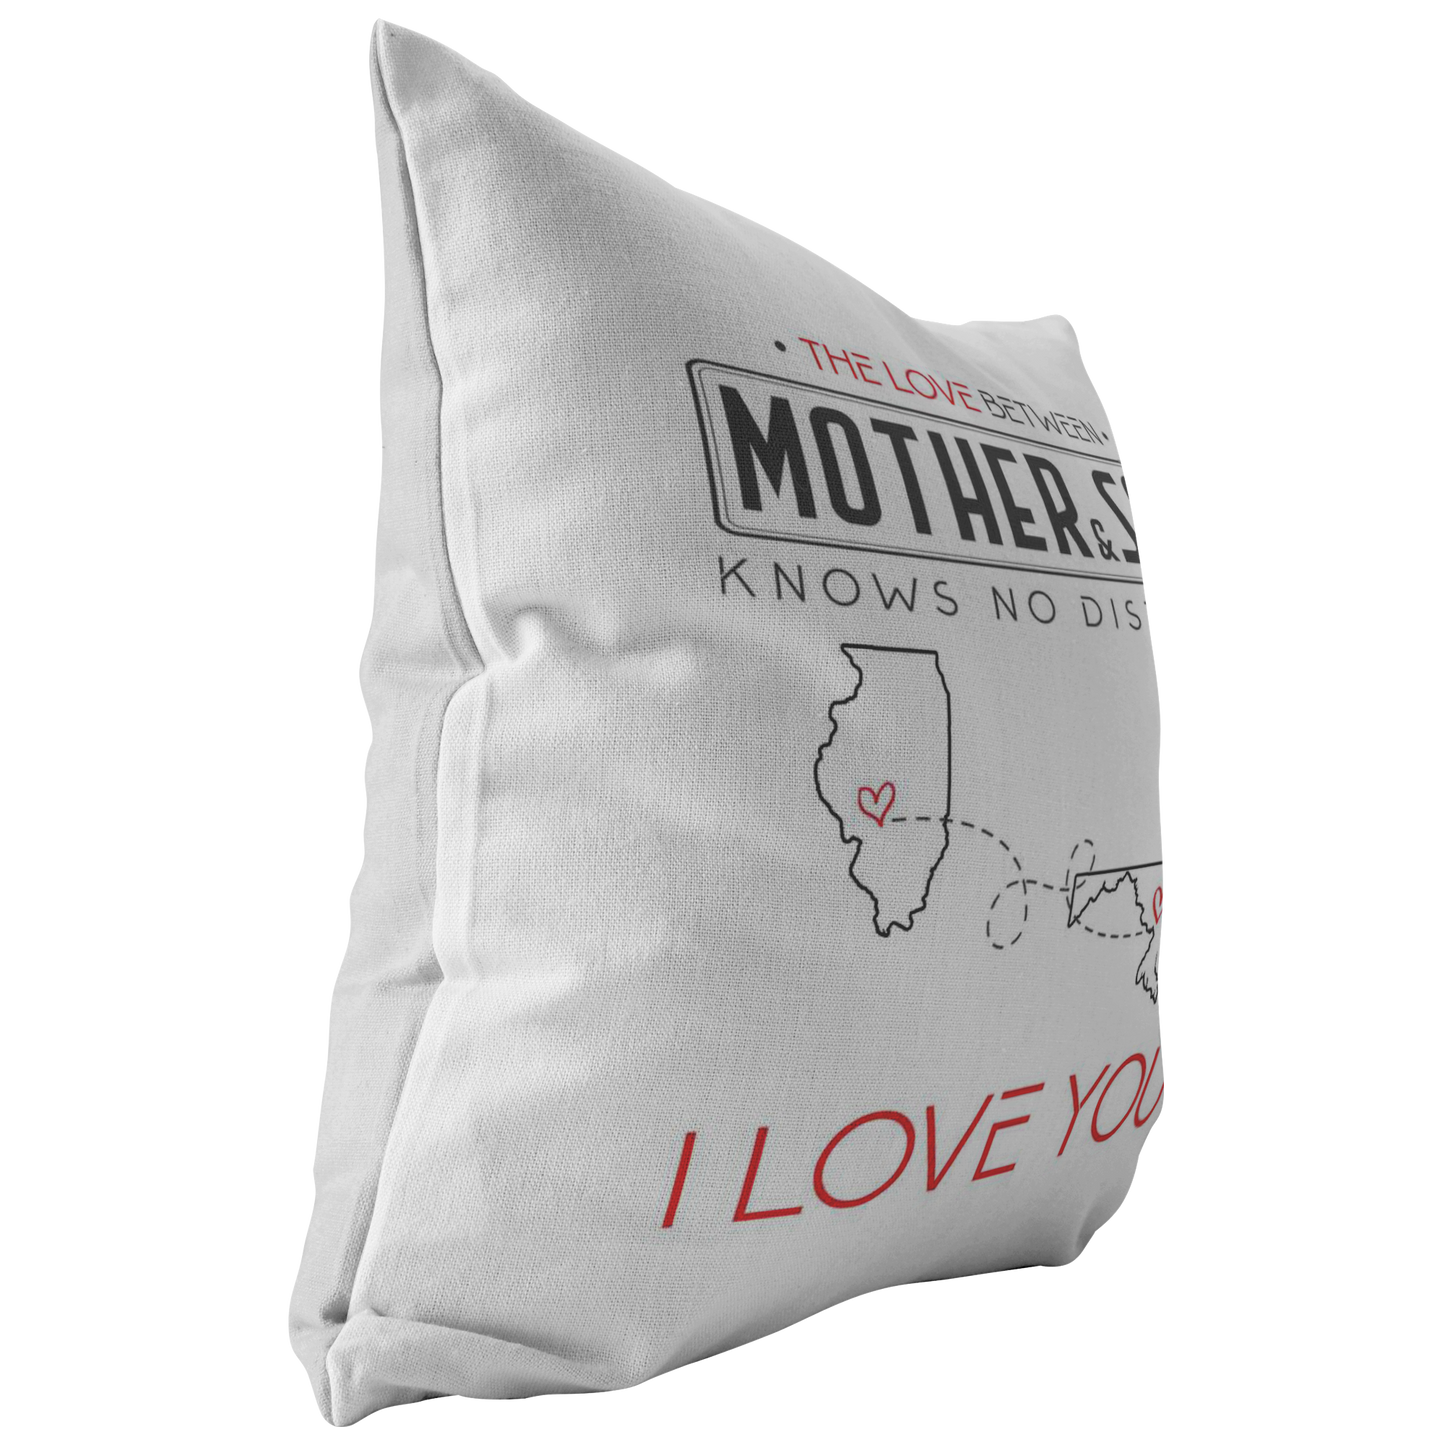 ND-pl20419466-sp-23312 - Mothers Day Gifts For Mom - The Love Between Mother  Son K